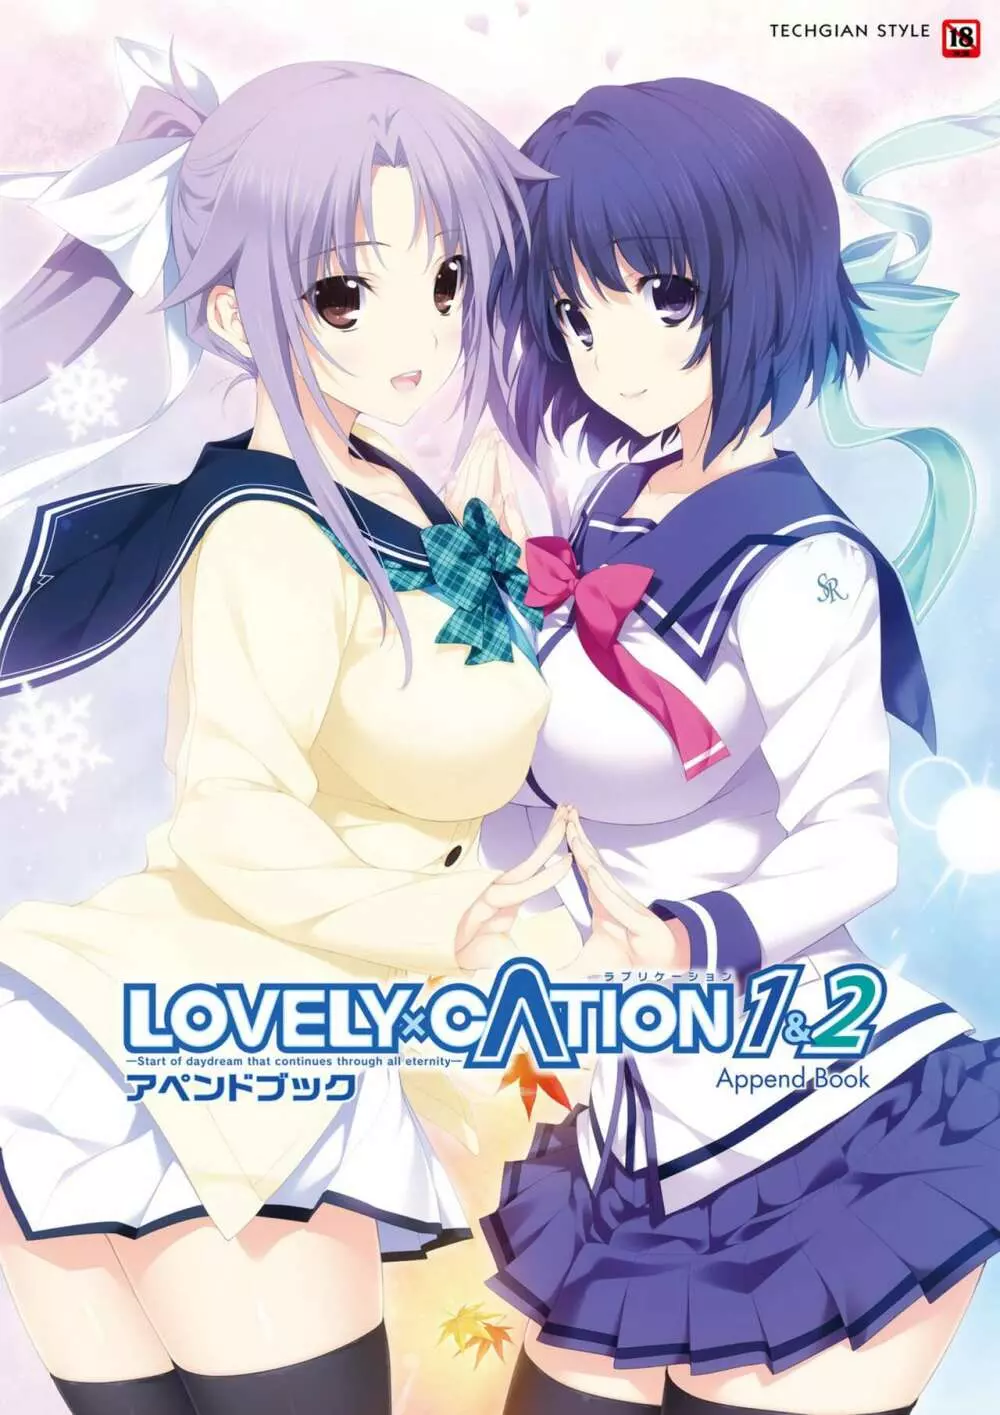 LOVELY×CATION1&2 アペンドブック 1ページ